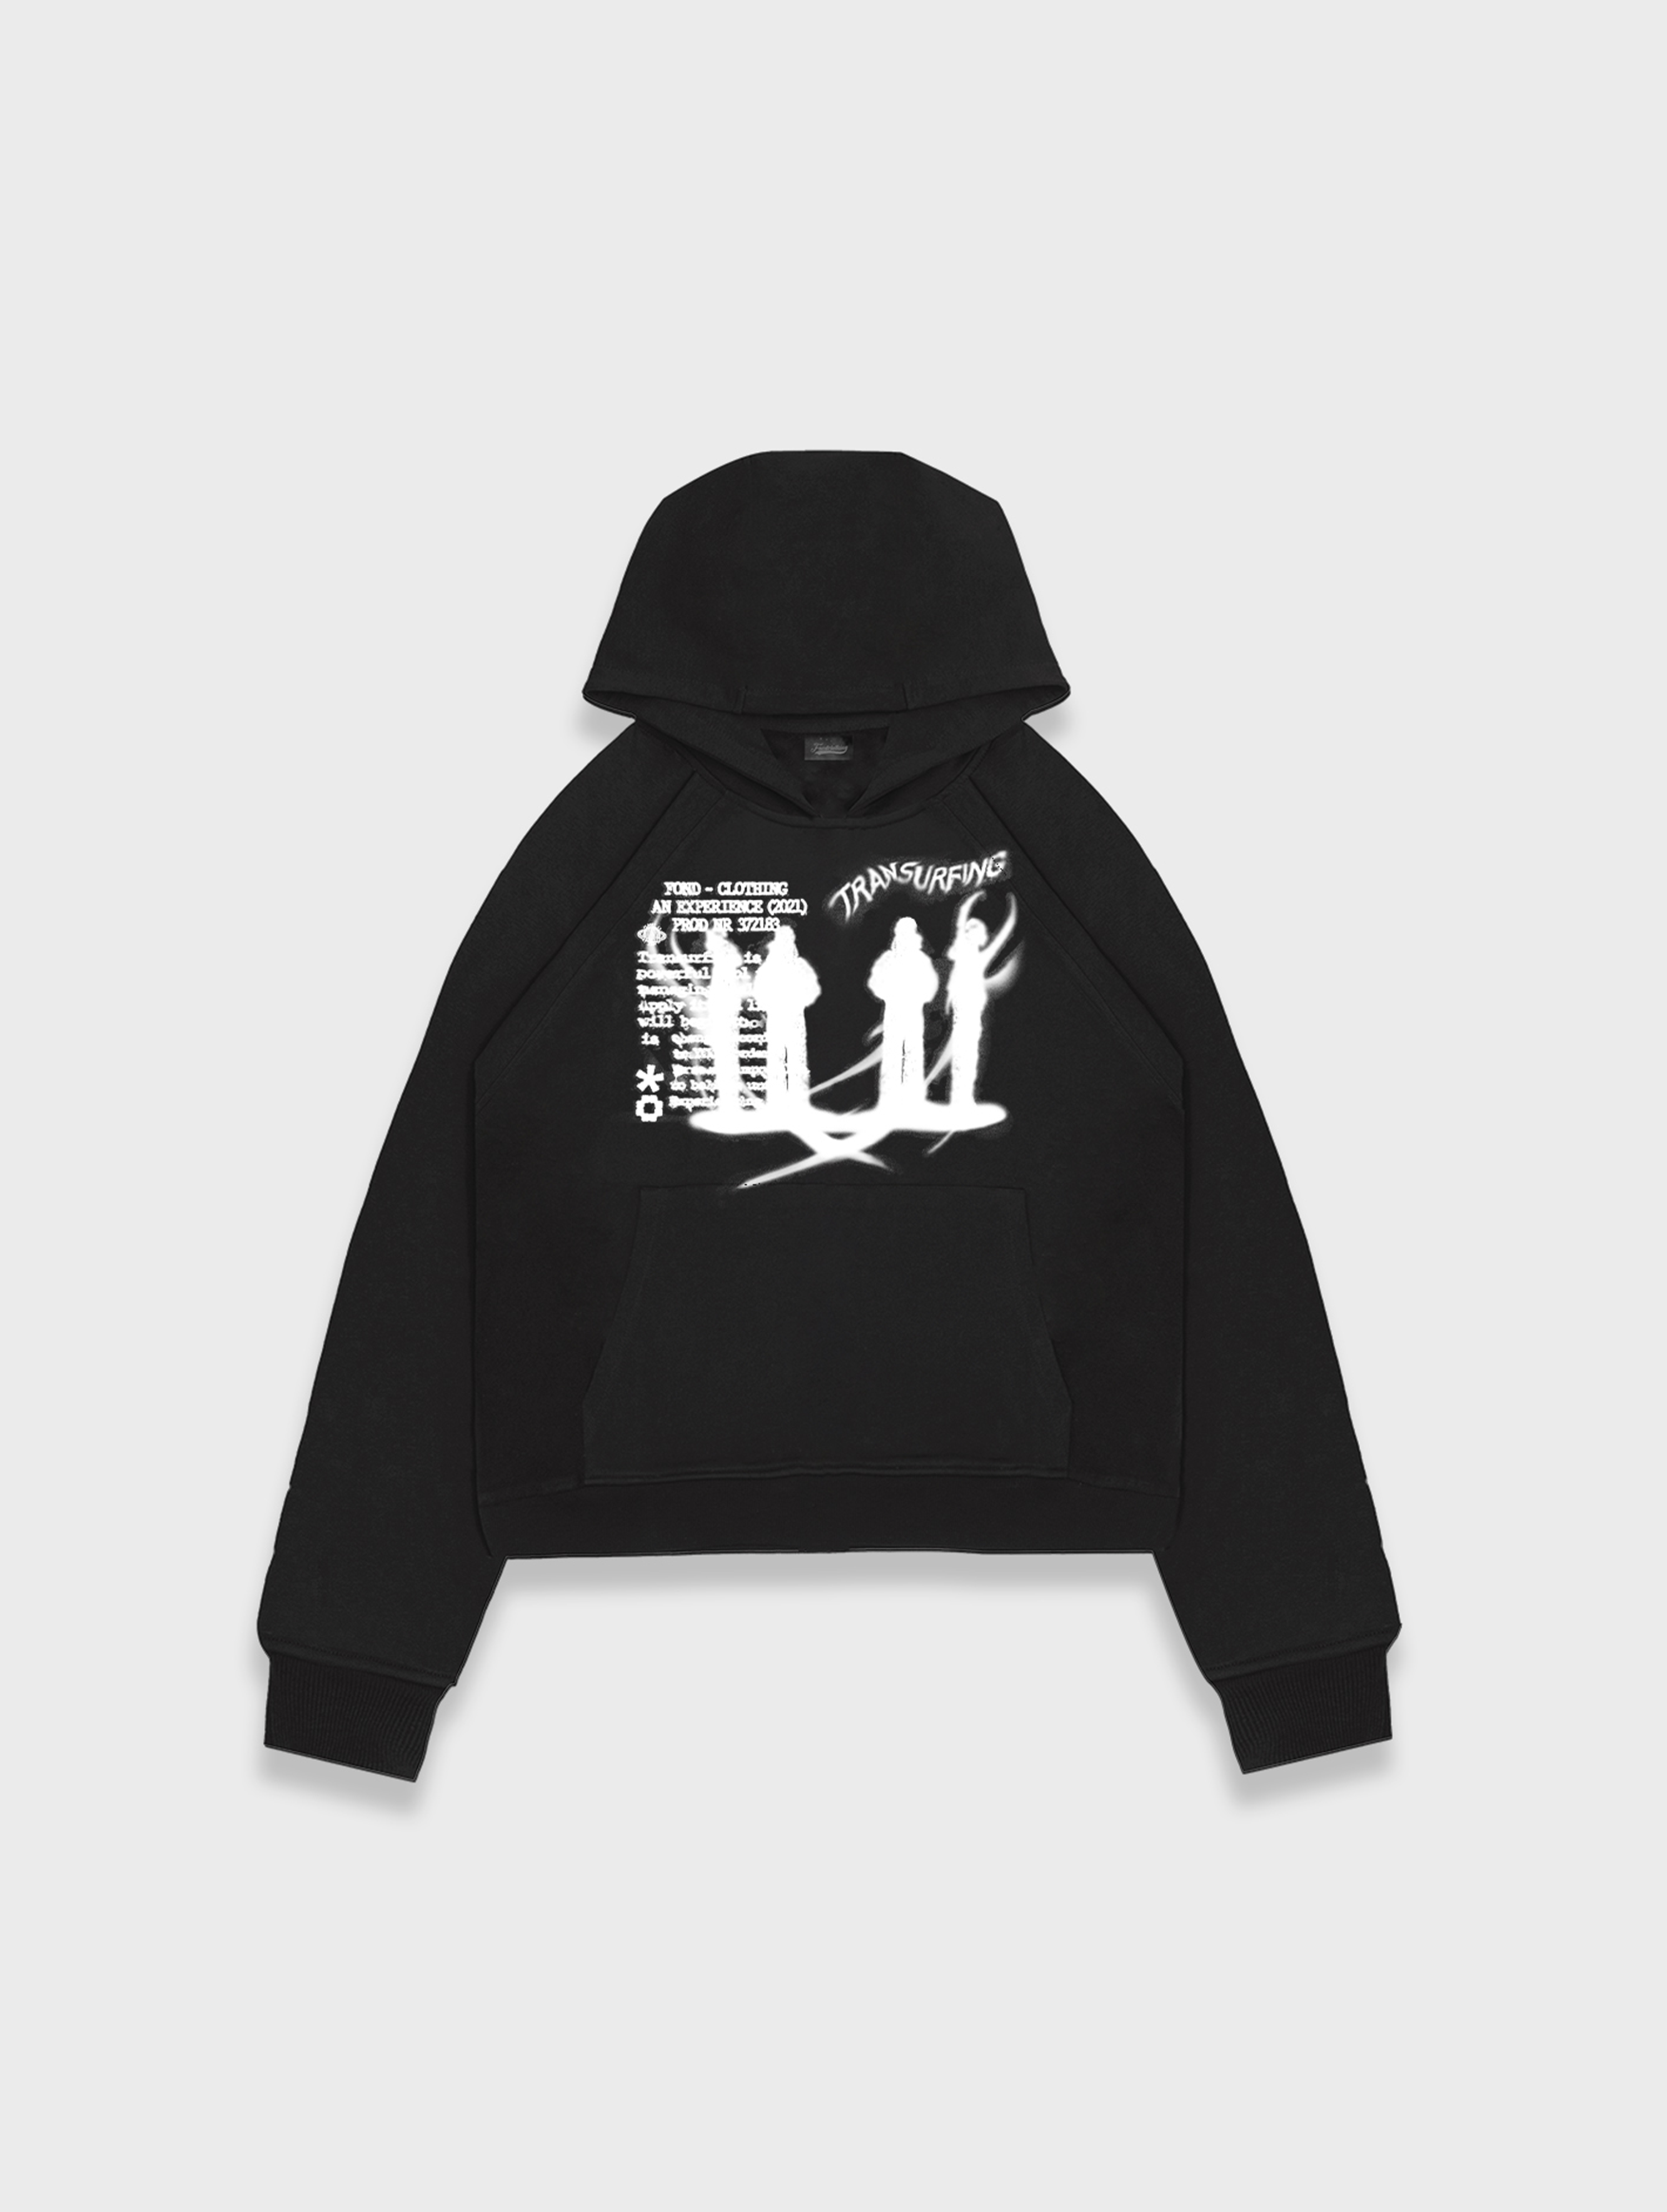 Transurf into Reality Hoodie